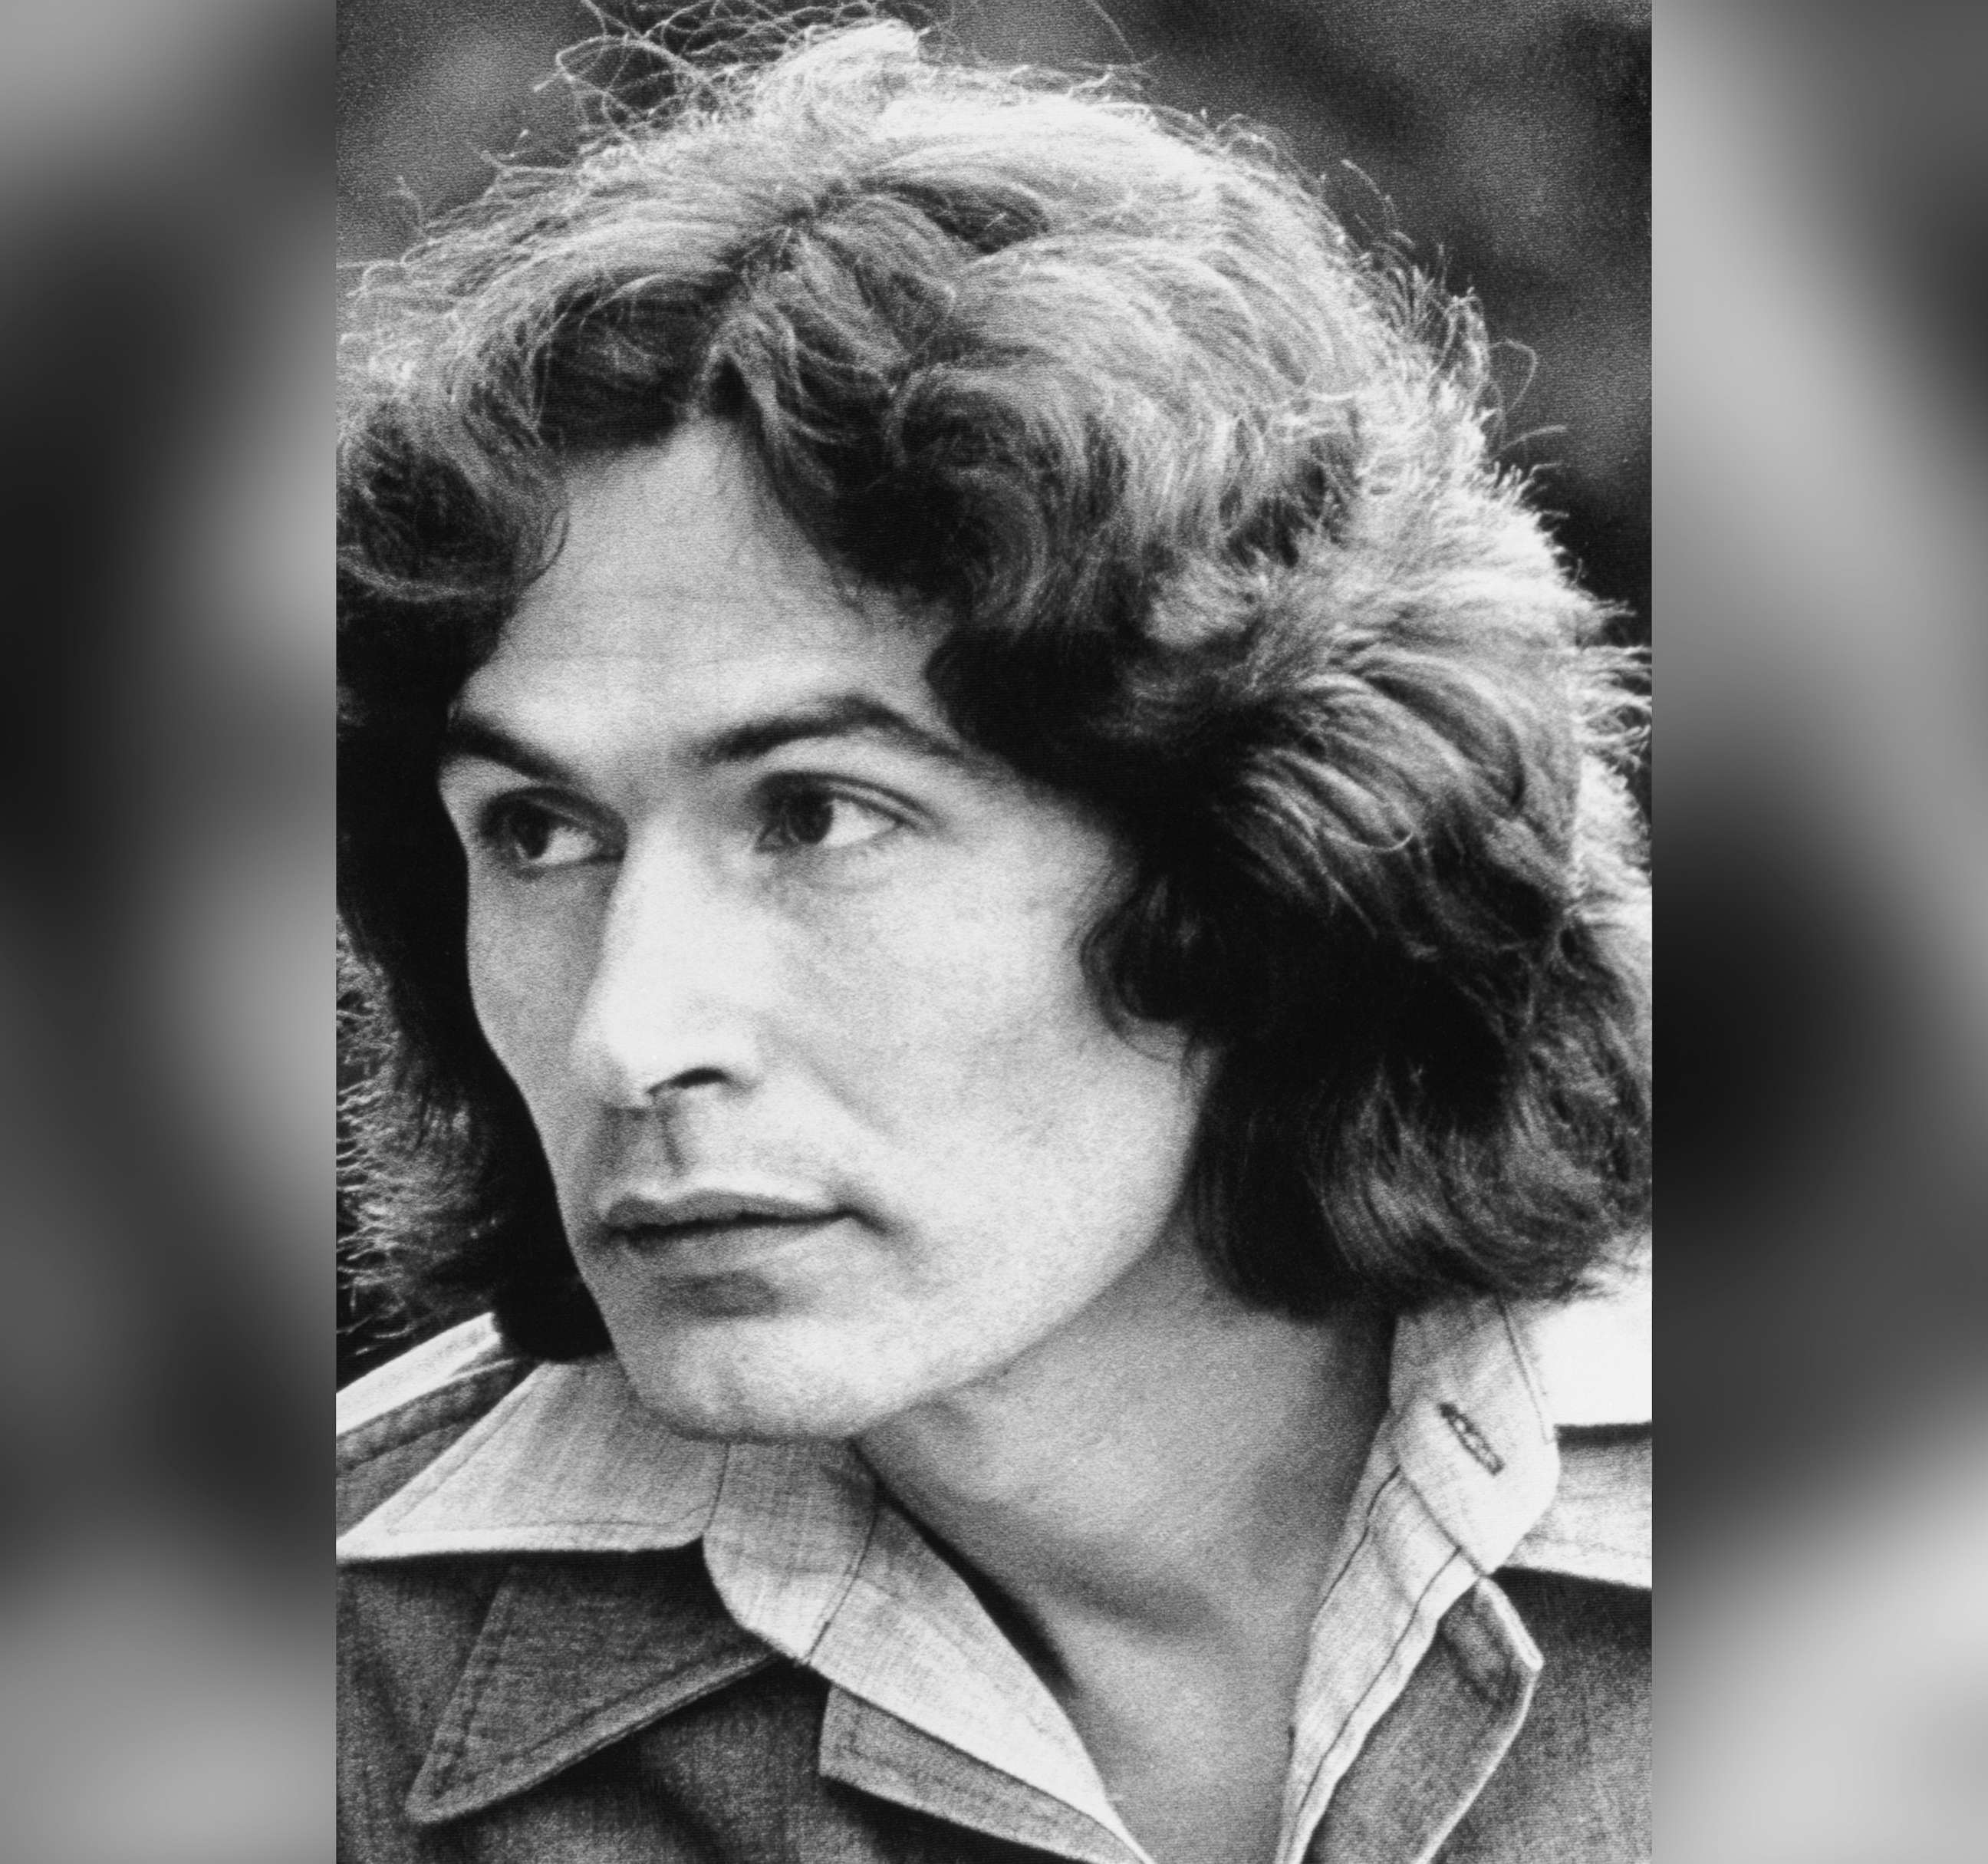 PHOTO: Rodney James Alcala is pictured in a file photo from 1980.